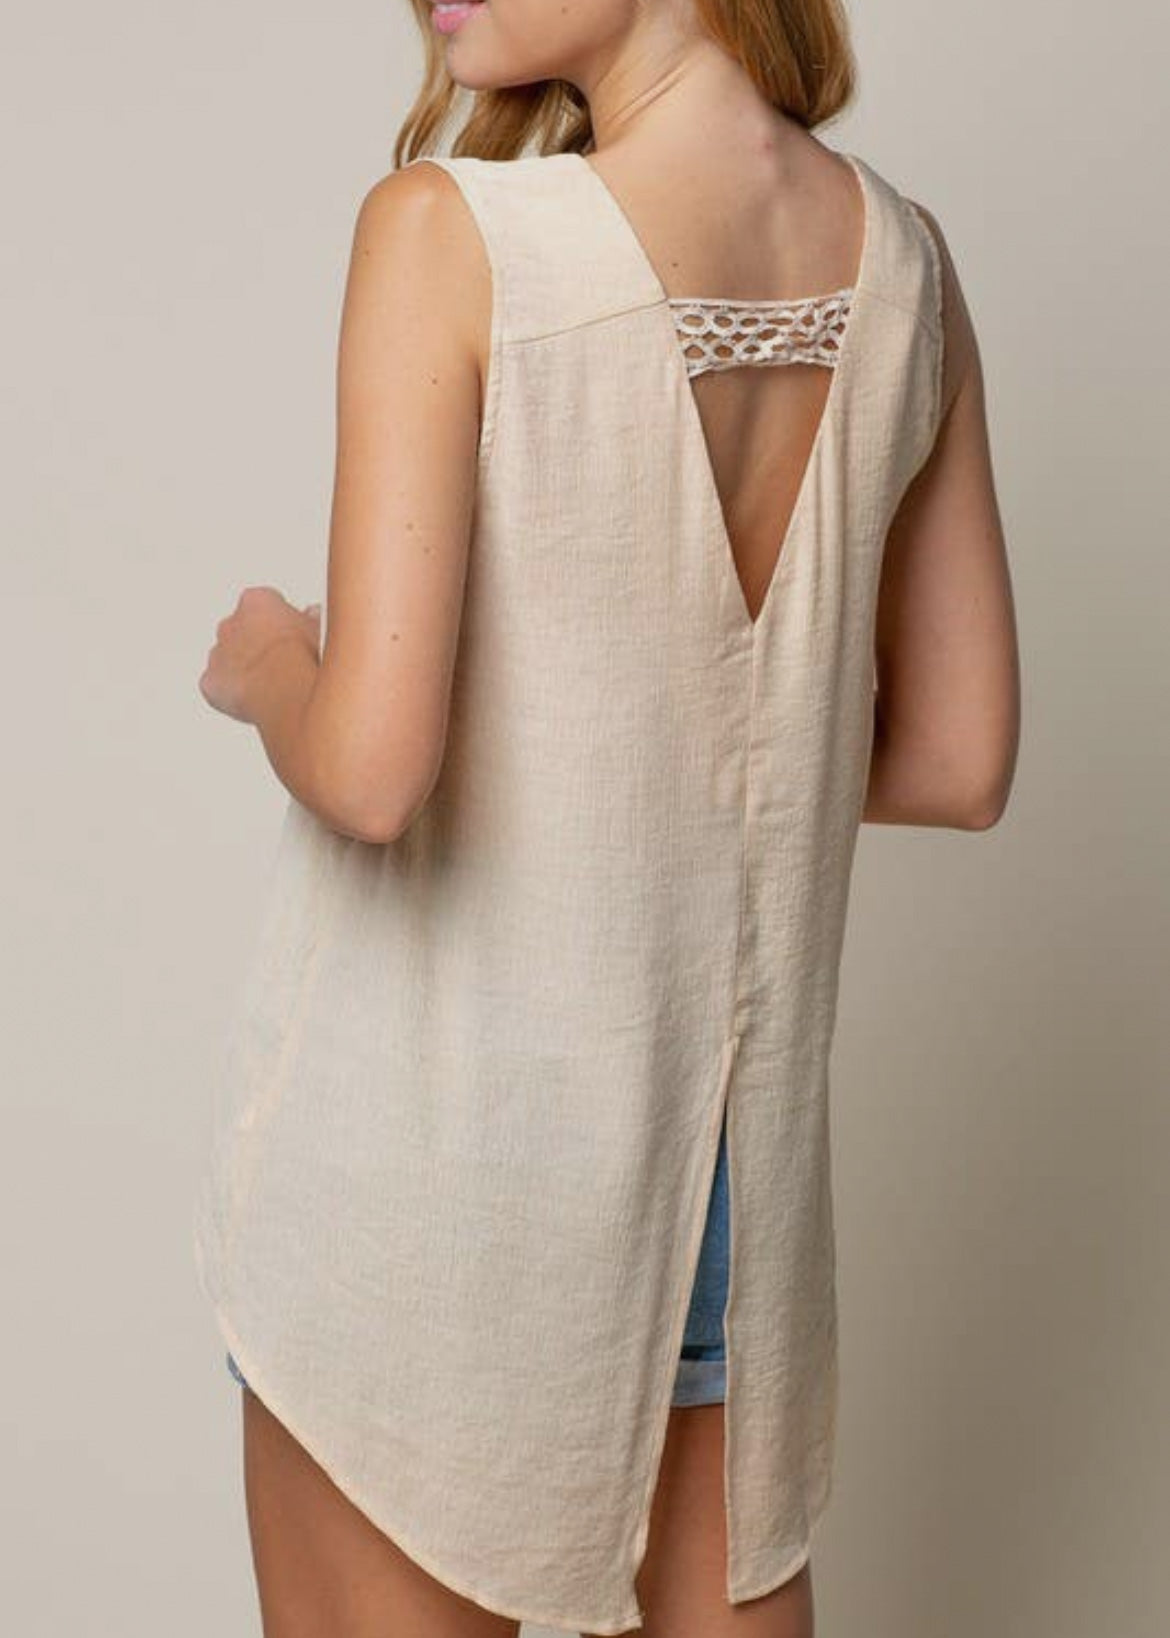 Elegant tank top in a dark cream color with a double v neckline. The back v neck has a crochet  strap and the back hemline splits up just below the waist. 